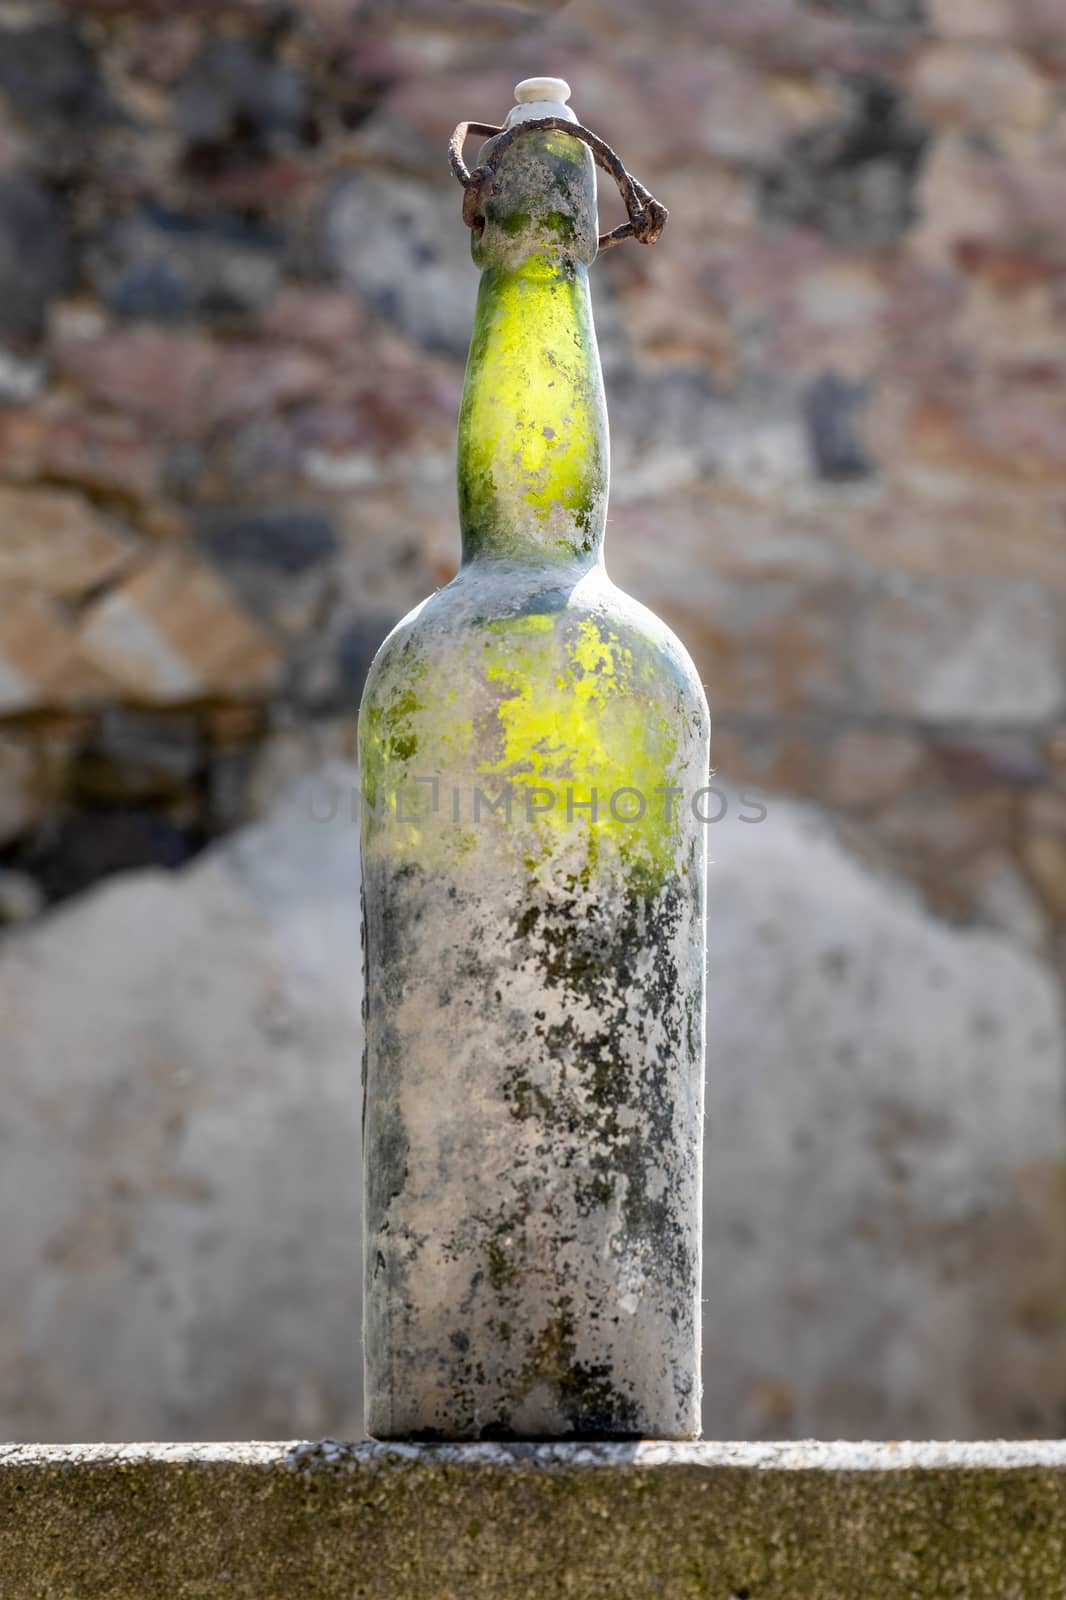 An image of a dirty old wine bottle